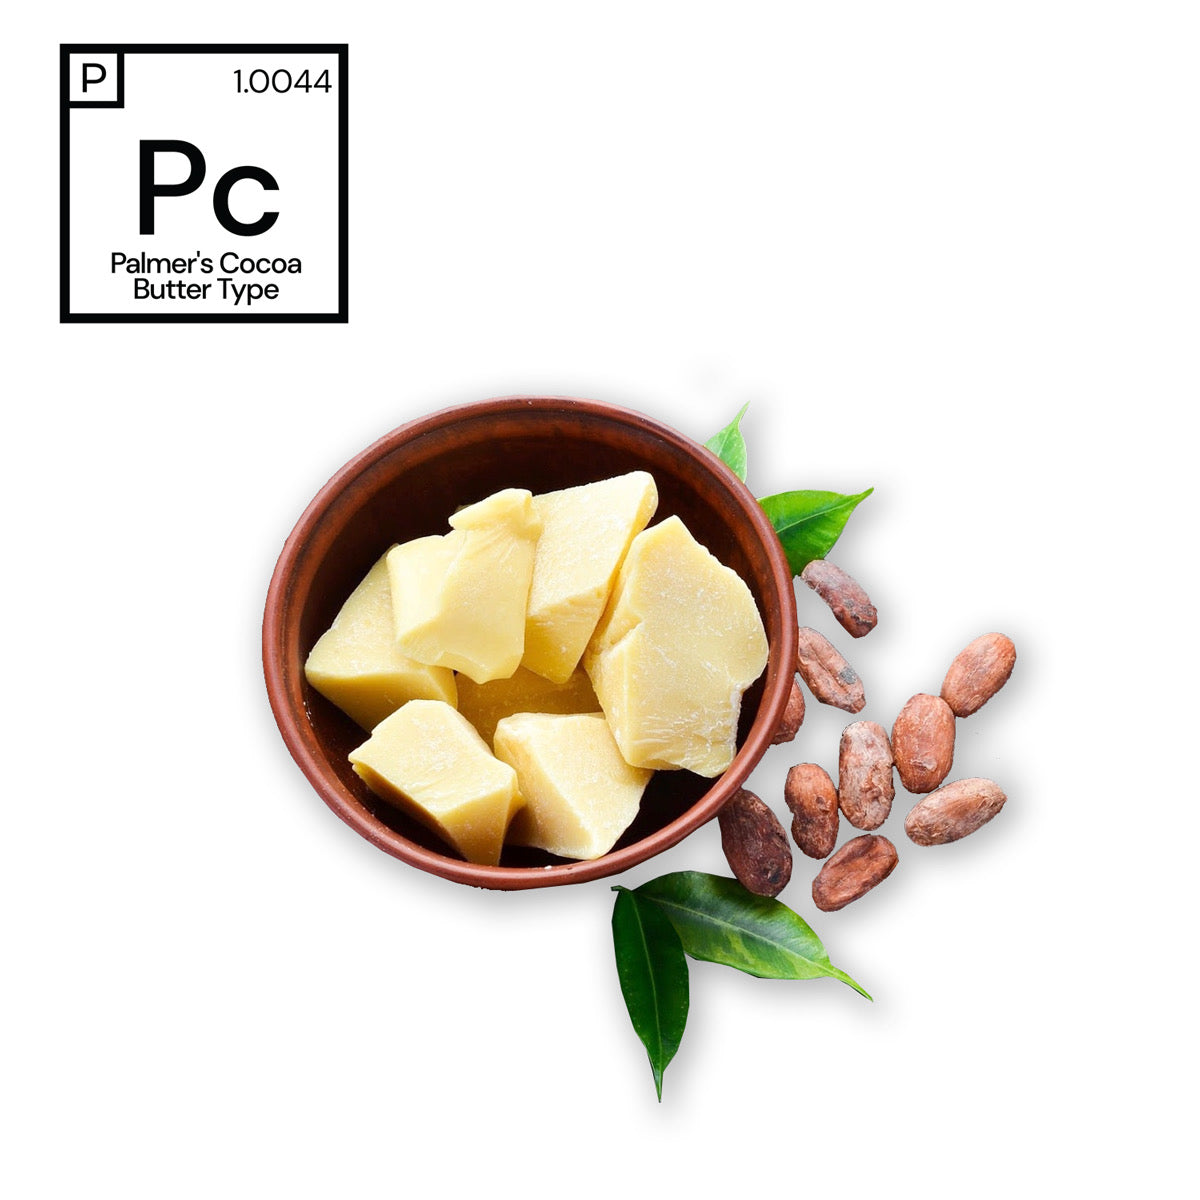 Palmer's Cocoa Butter Type Fragrance #1.0044